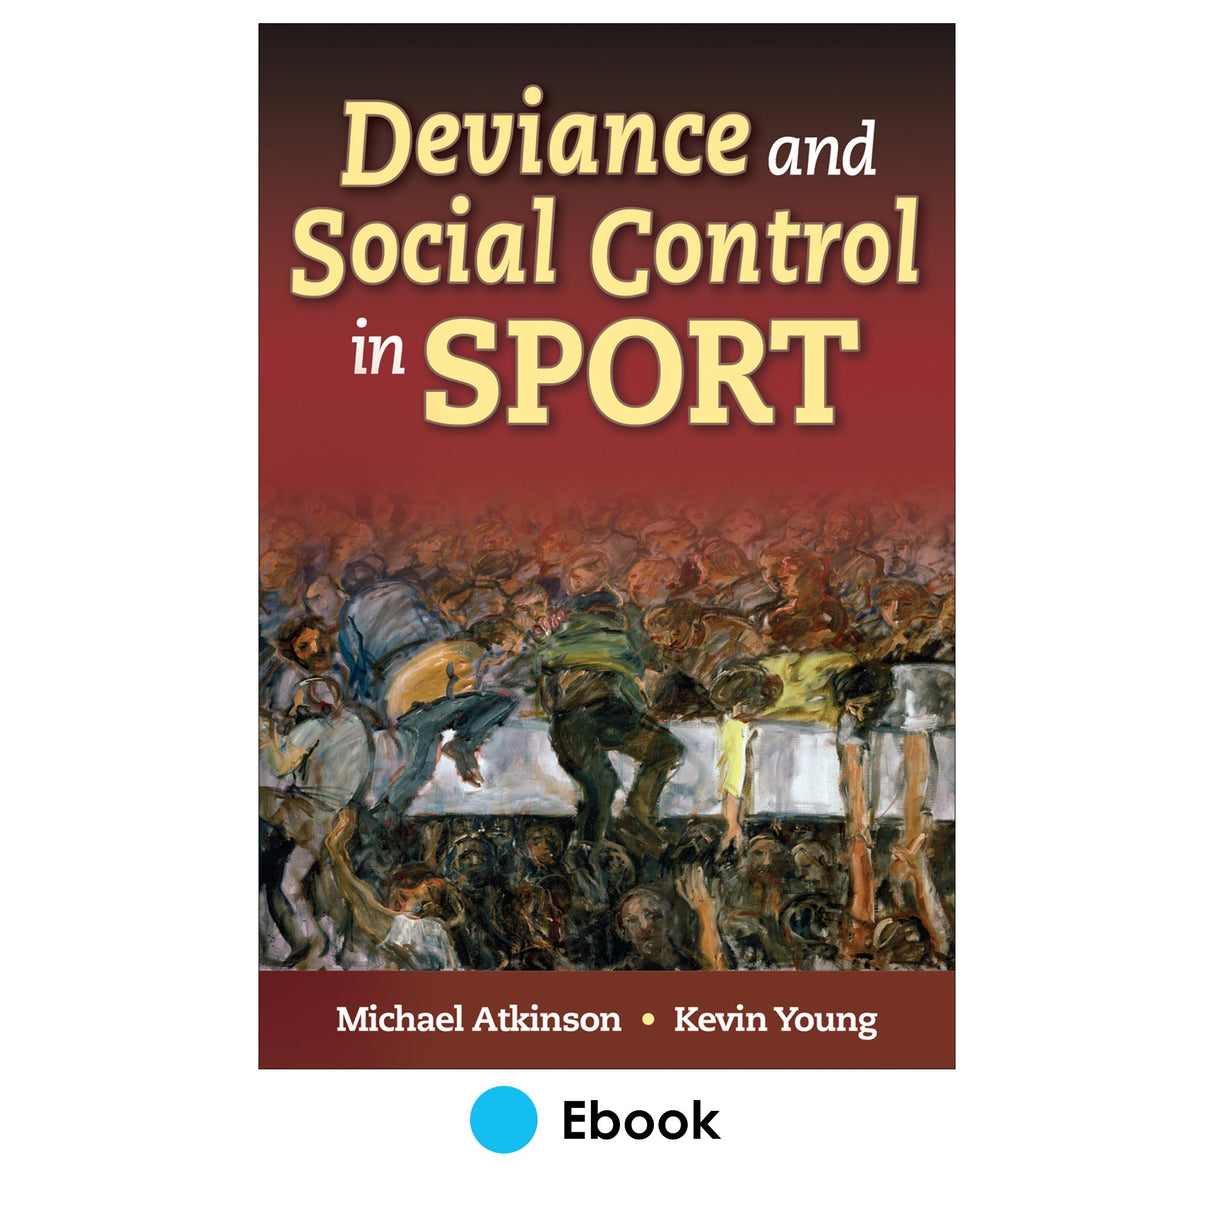 Deviance and Social Control in Sport PDF